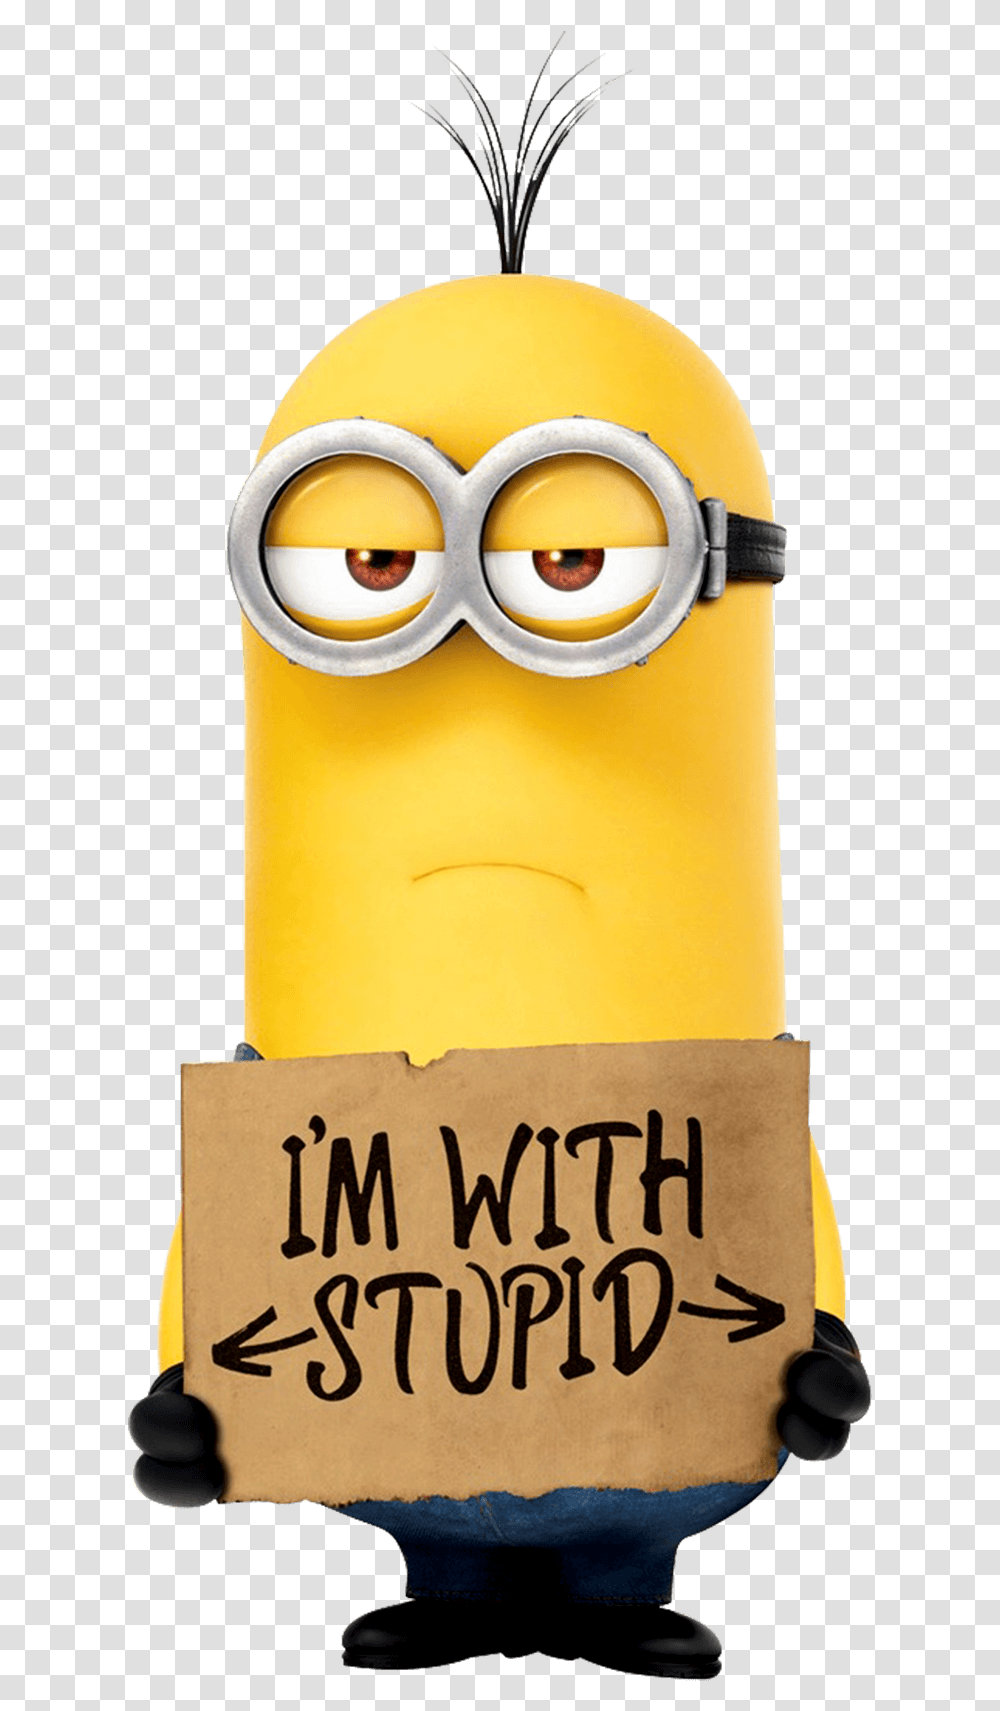 Despicable Me Minion Image Free Download Searchpngcom Iphone 6 Cartoon Wallpaper Iphone, Text, Scroll Transparent Png